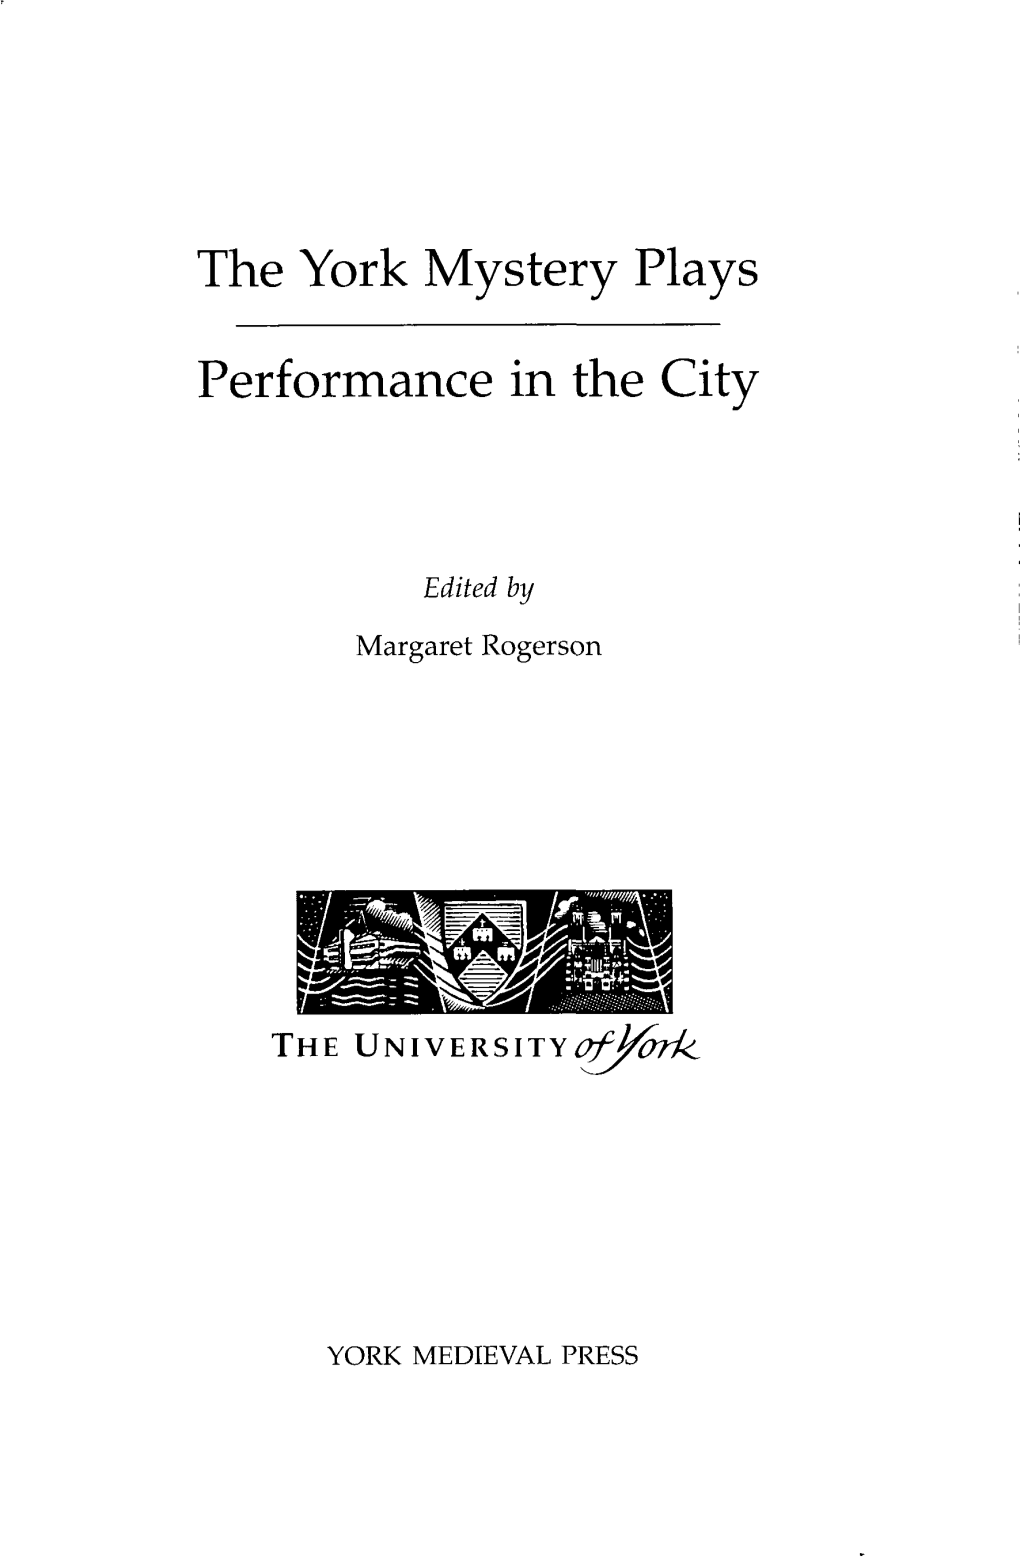 The York Mystery Plays Performance in the City